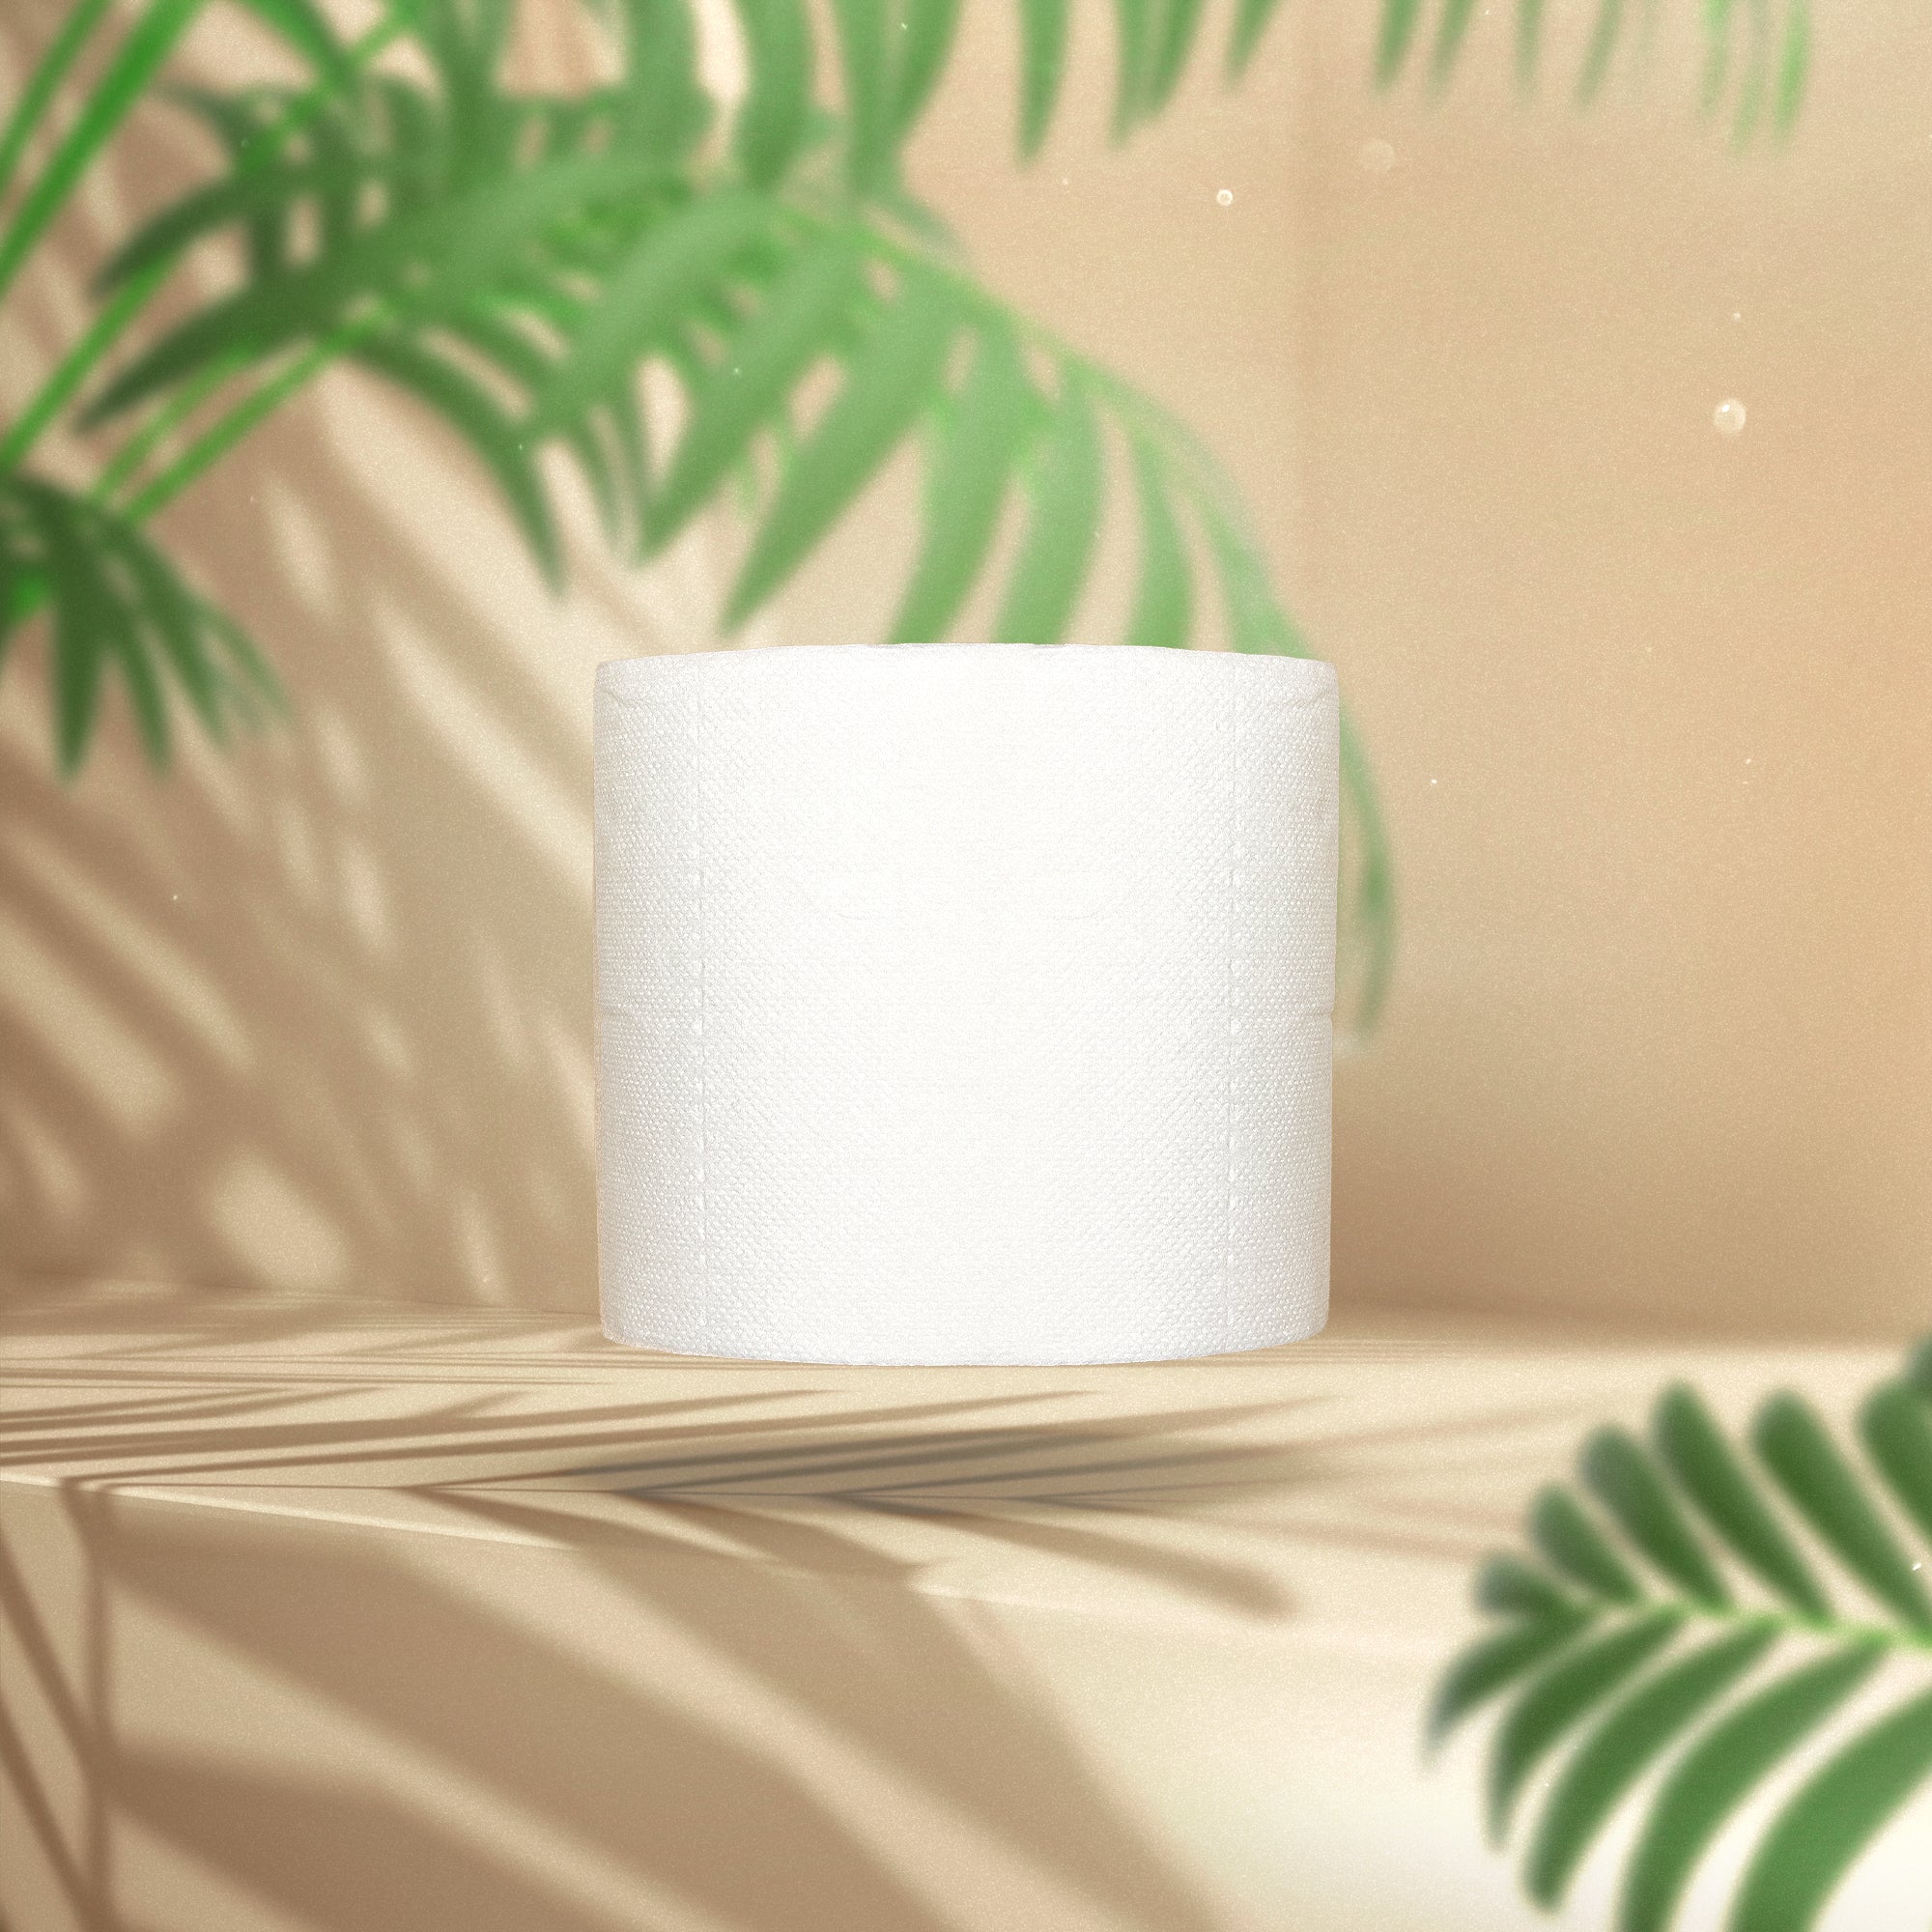 Sample Eco-Friendly 3-Ply Bamboo Toilet Paper Roll